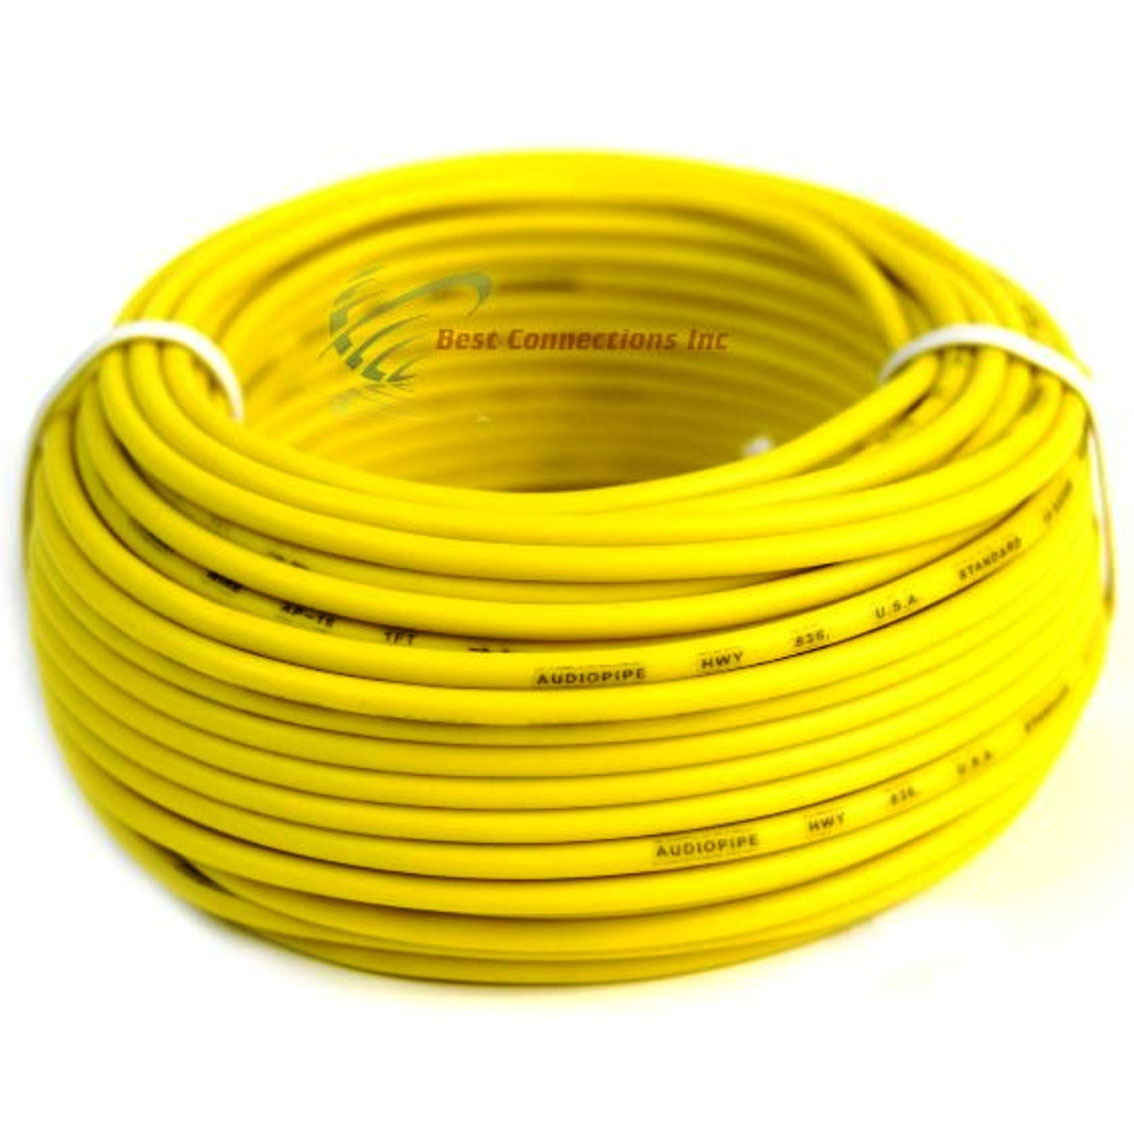 18 GA Gauge 50' Feet Yellow Audiopipe Car Audio Home Remote Primary Cable Wire - image 1 of 4